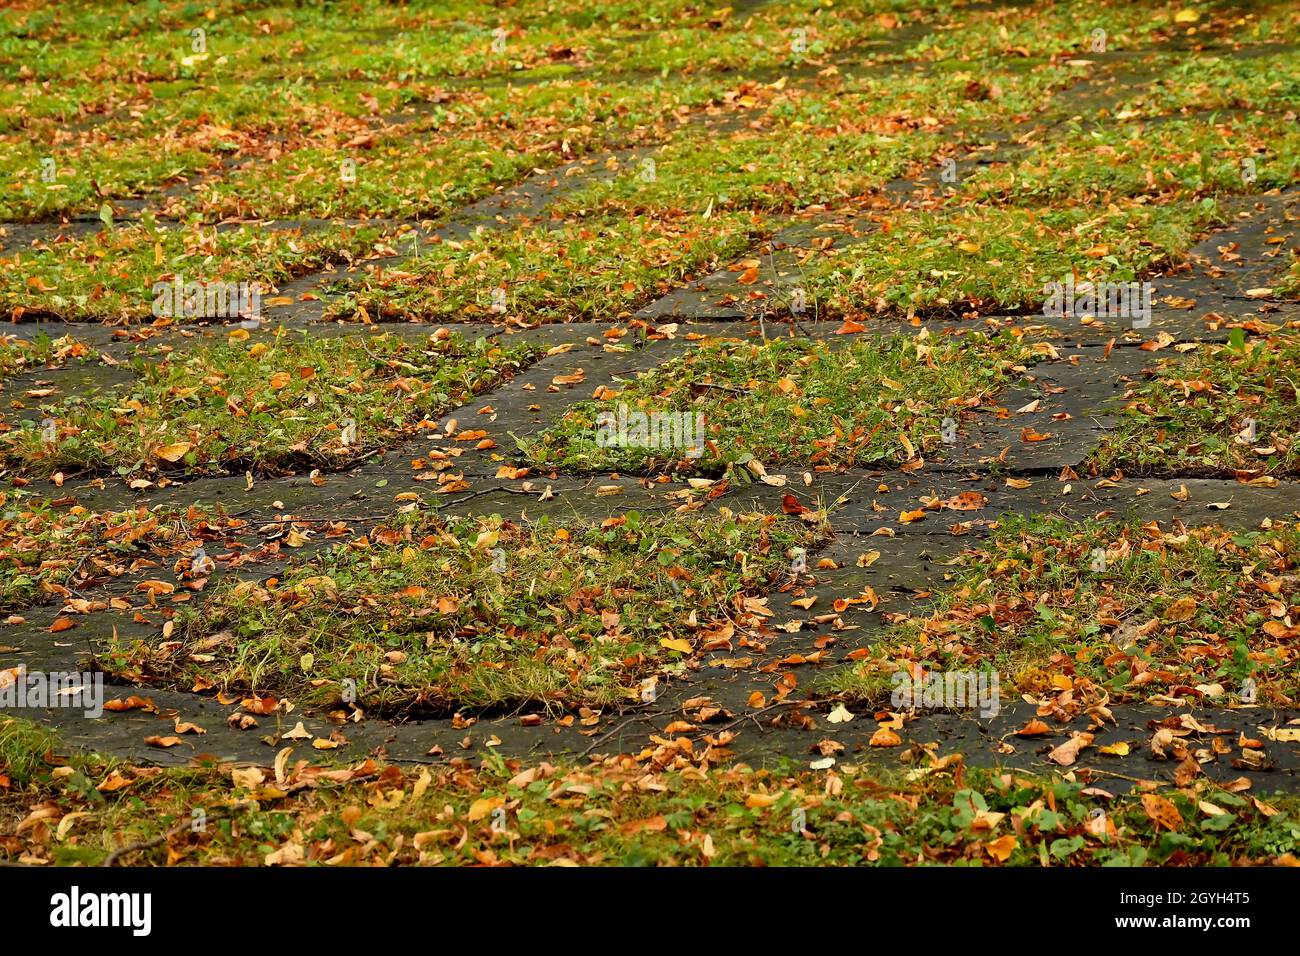 parking ground with lawn stones and fallen autumnal colored leaves Stock Photo